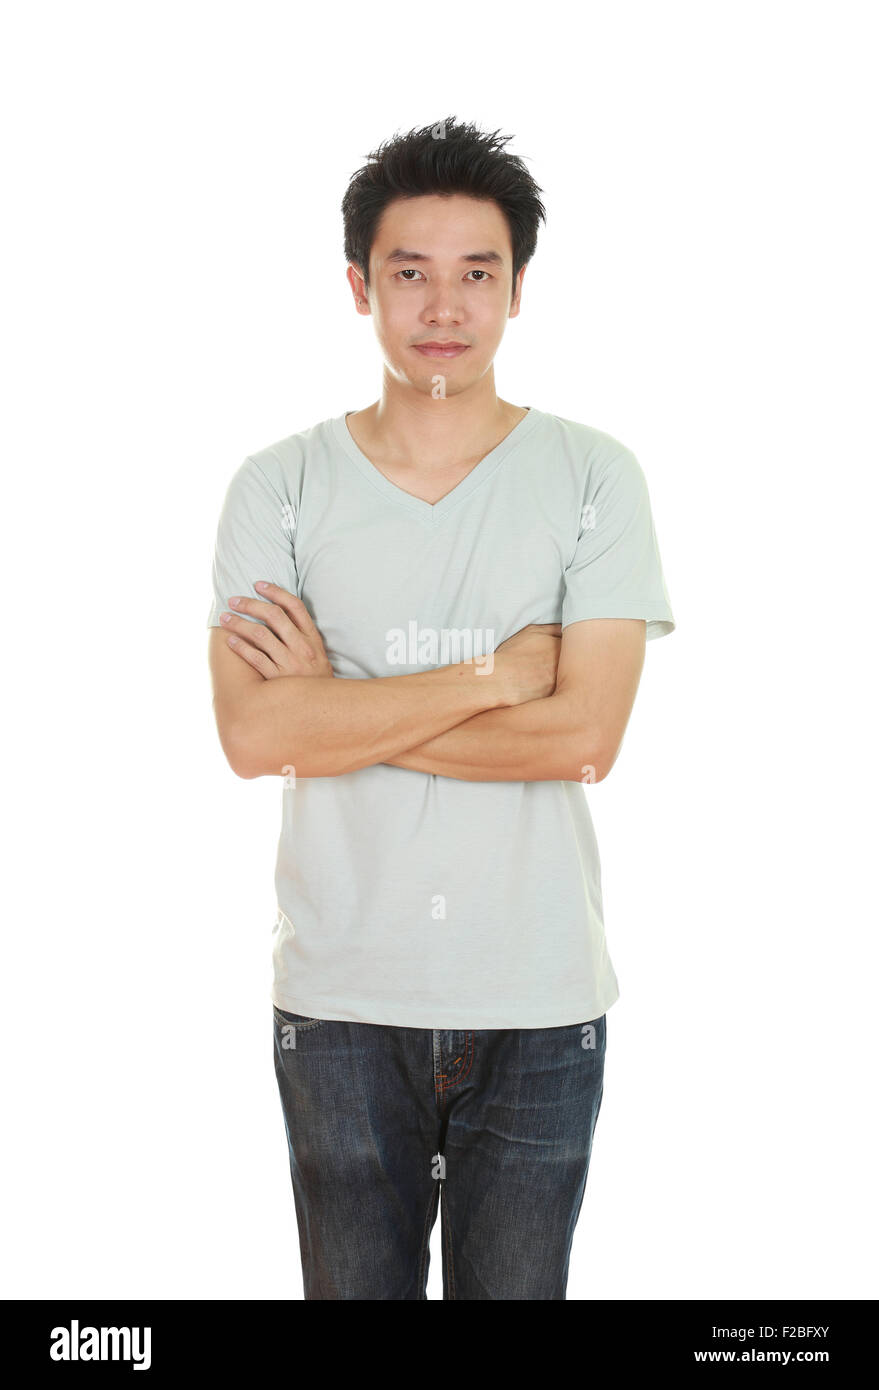 man with arms crossed, wearing t-shirt isolated on white background. Stock Photo